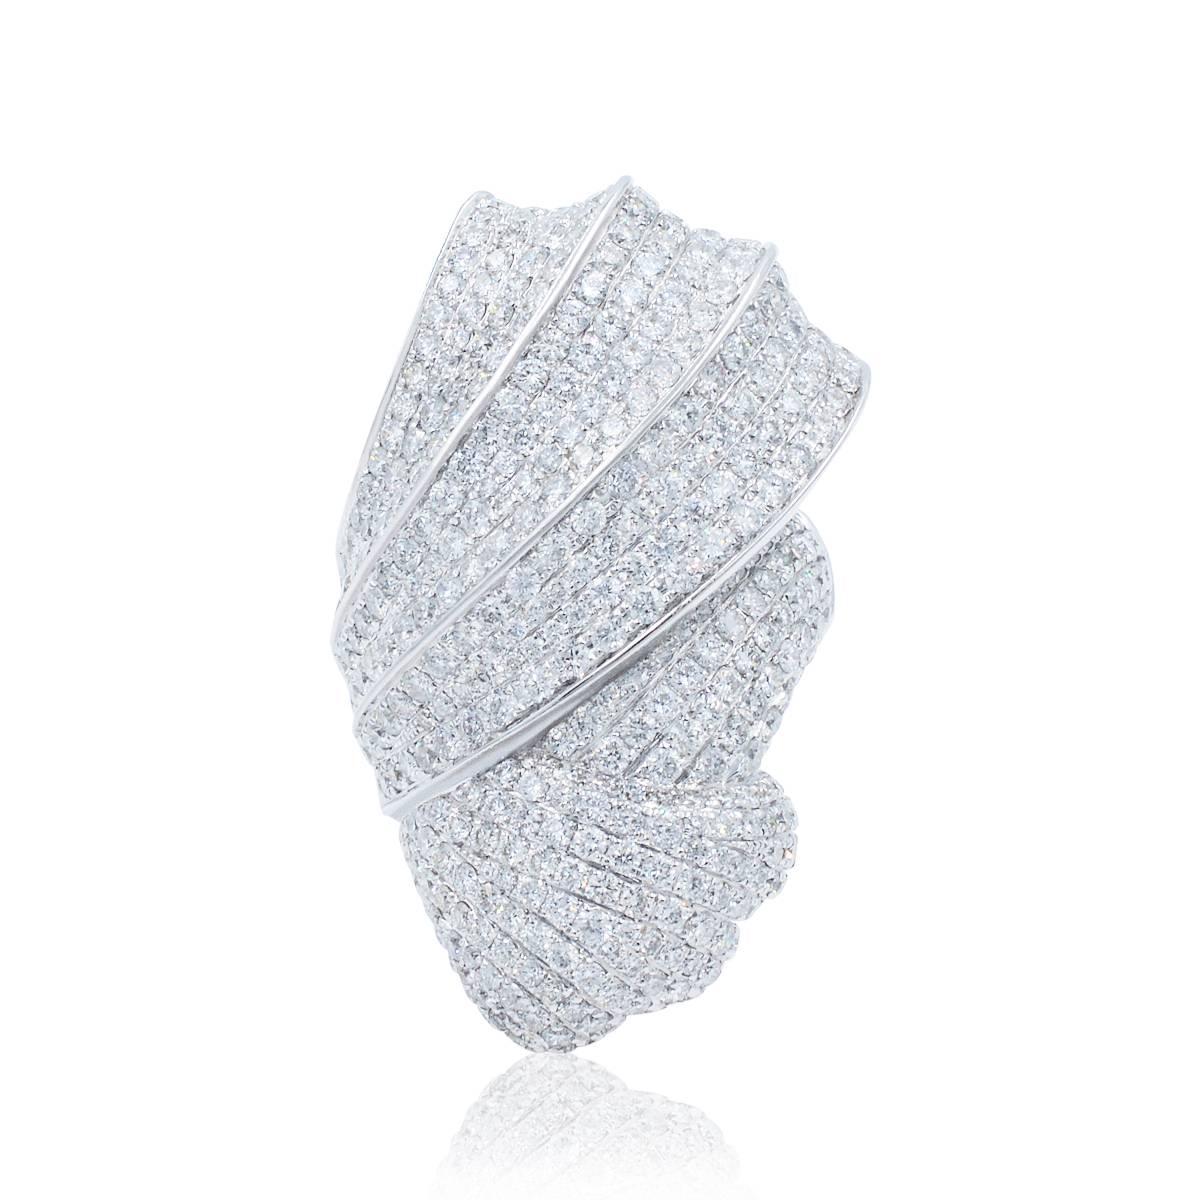 Now this is what we call a ring!

Large piece of jewelry encrusted with pave set round brilliant cuts. 
Diamonds: 4cts
Quality: G-H, VS-SI
Ring grams: 30gr

This is an impressive heavy ring that feels important on. Comfortable to wear and is perfect